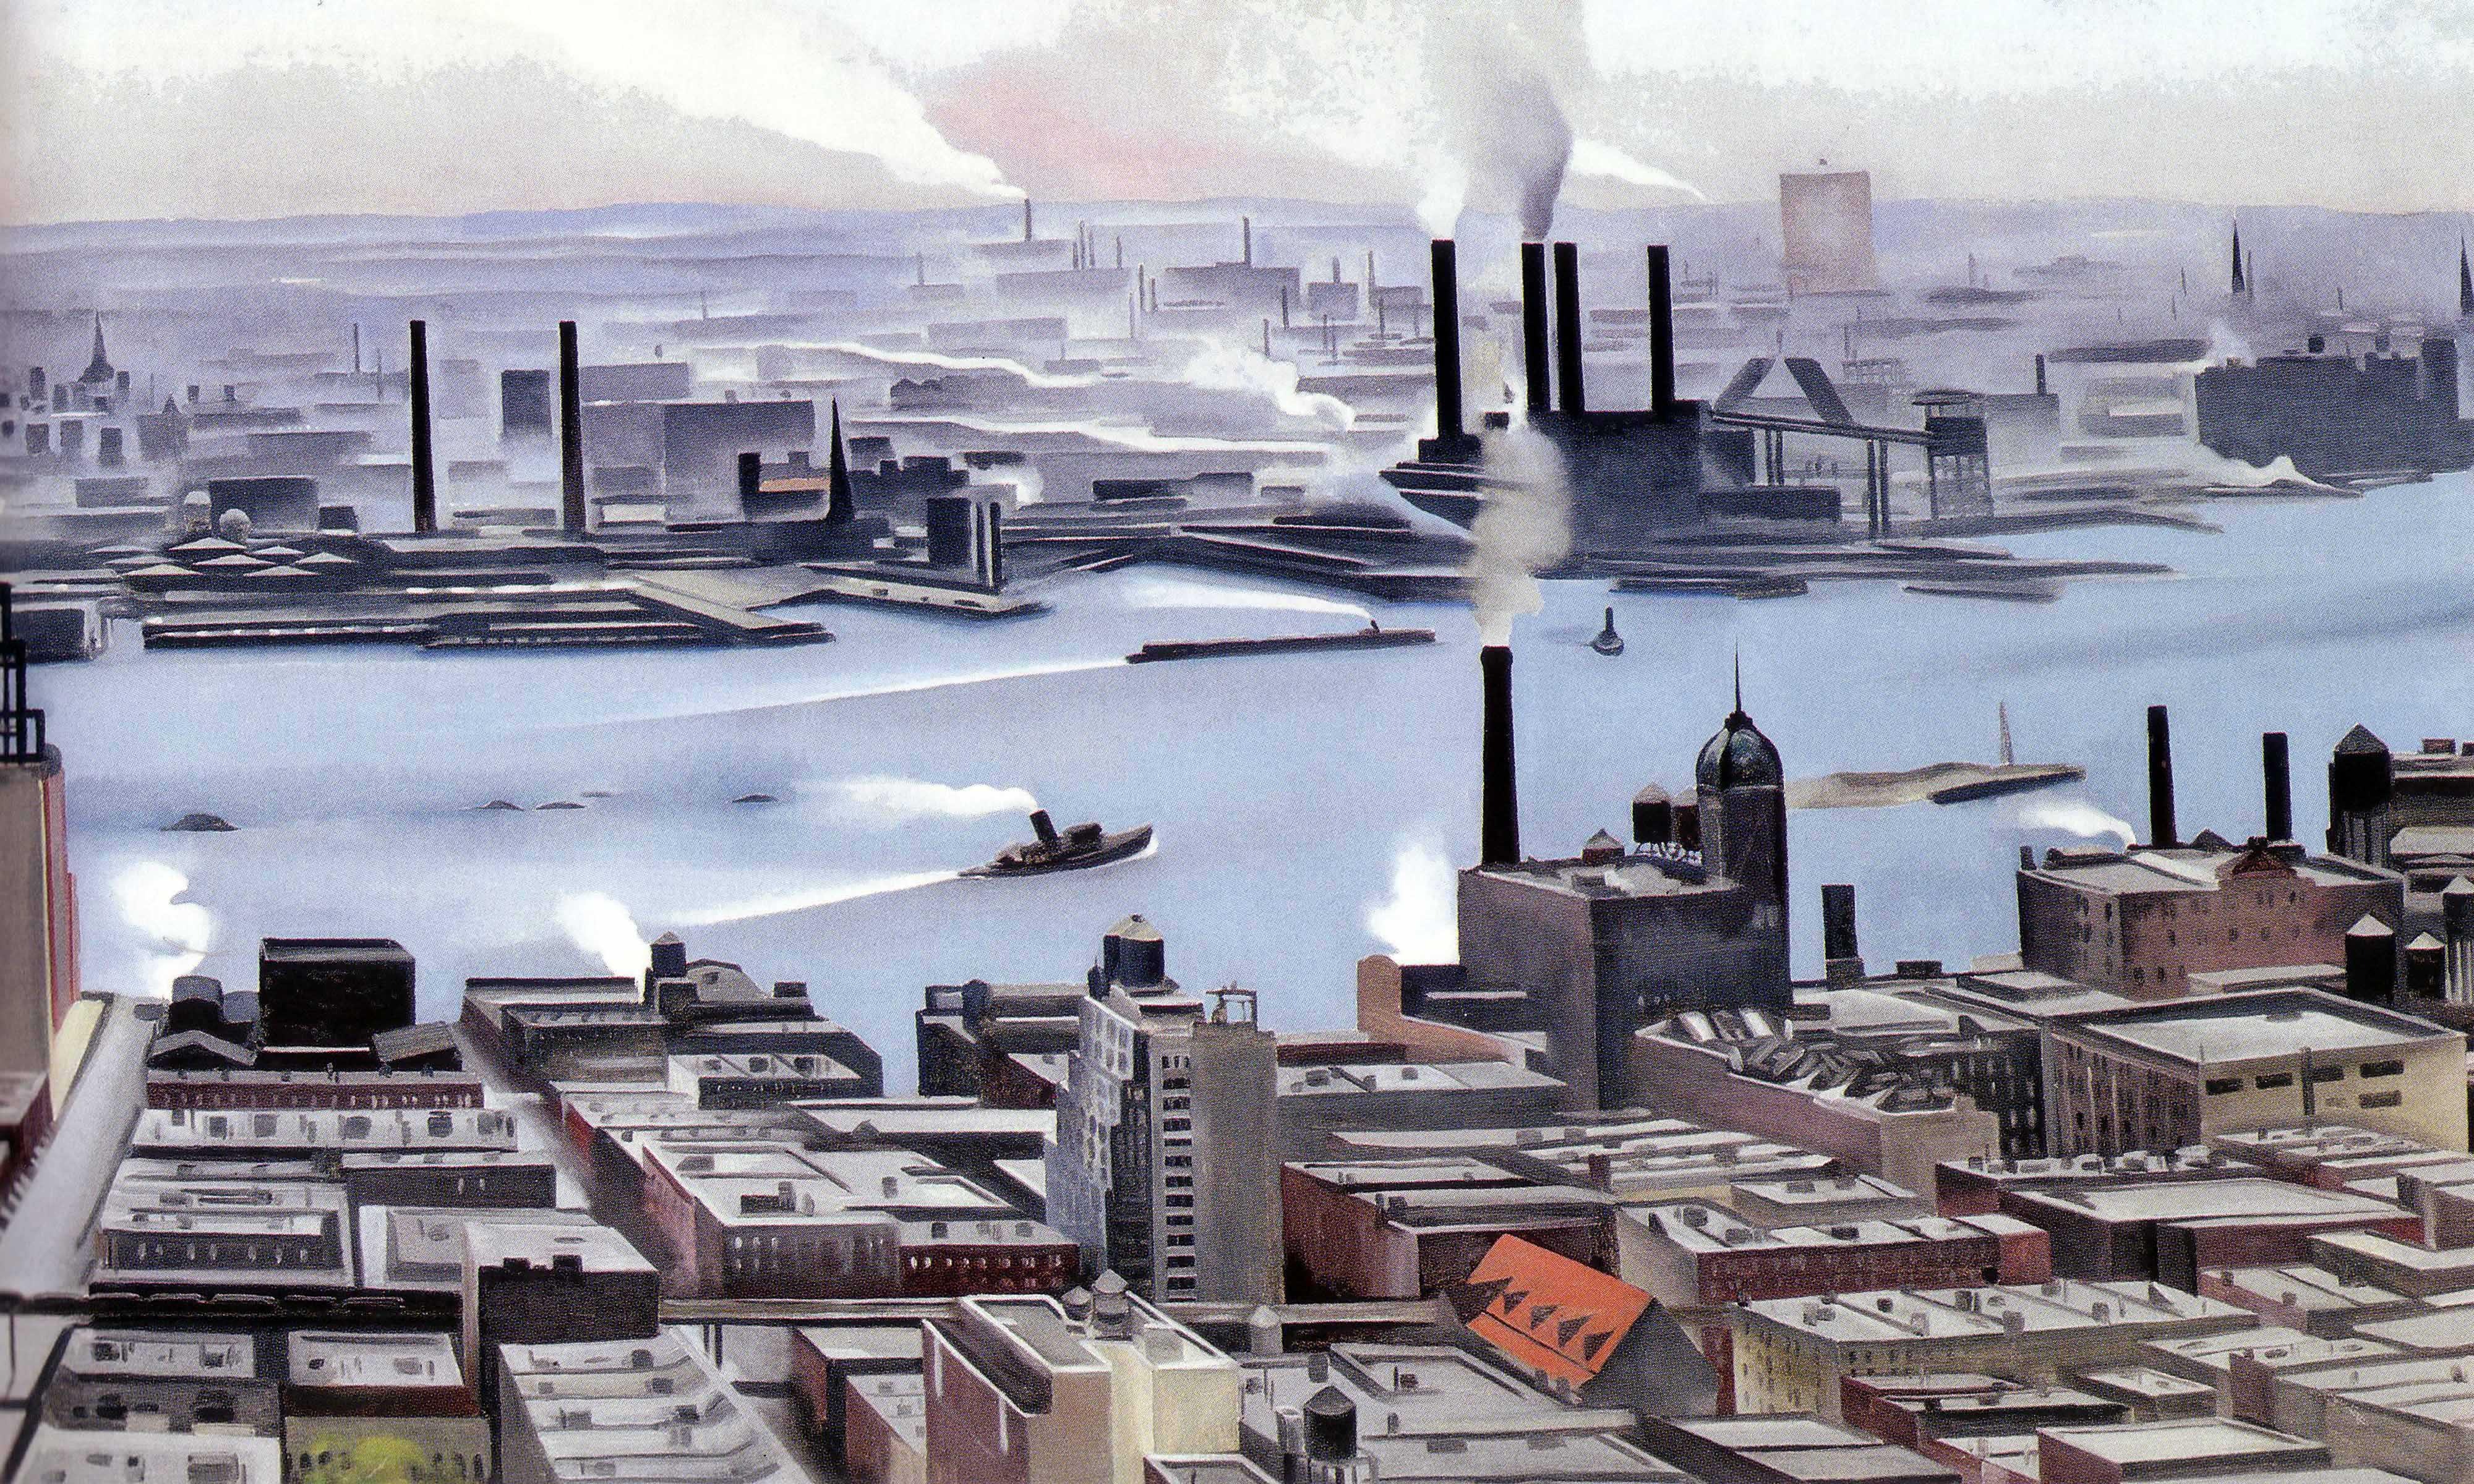 Georgia O’Keeffe, "East River from the 30th Story of Shelton Hotel," 1928, Oil on canvas, 30 x 48 1/8 in. (33 3/4 x 51 7/8 x 2 in. framed), Stephen B. Lawrence Fund, 1958.09